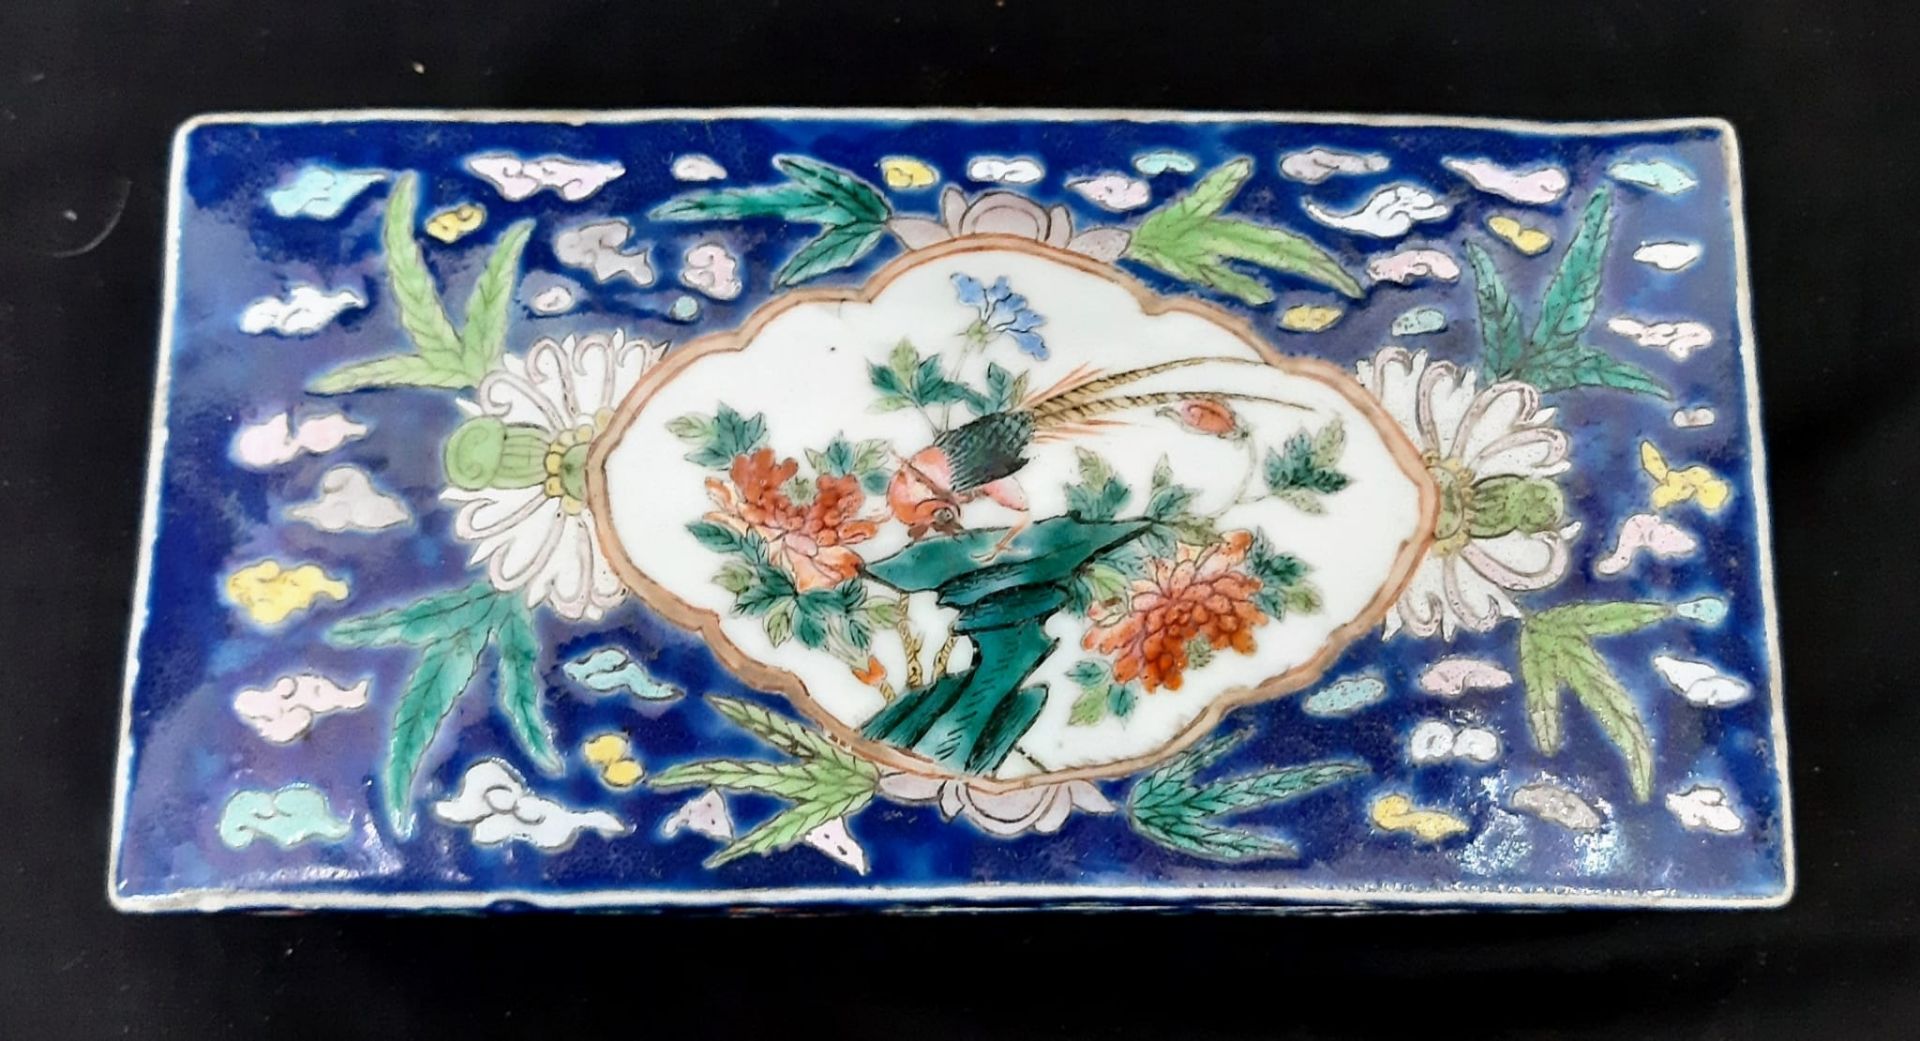 An Antique 19th Century Chinese Hand-Painted Large Jewellery/Trinket Ceramic Box. A colourful glazed - Bild 5 aus 7